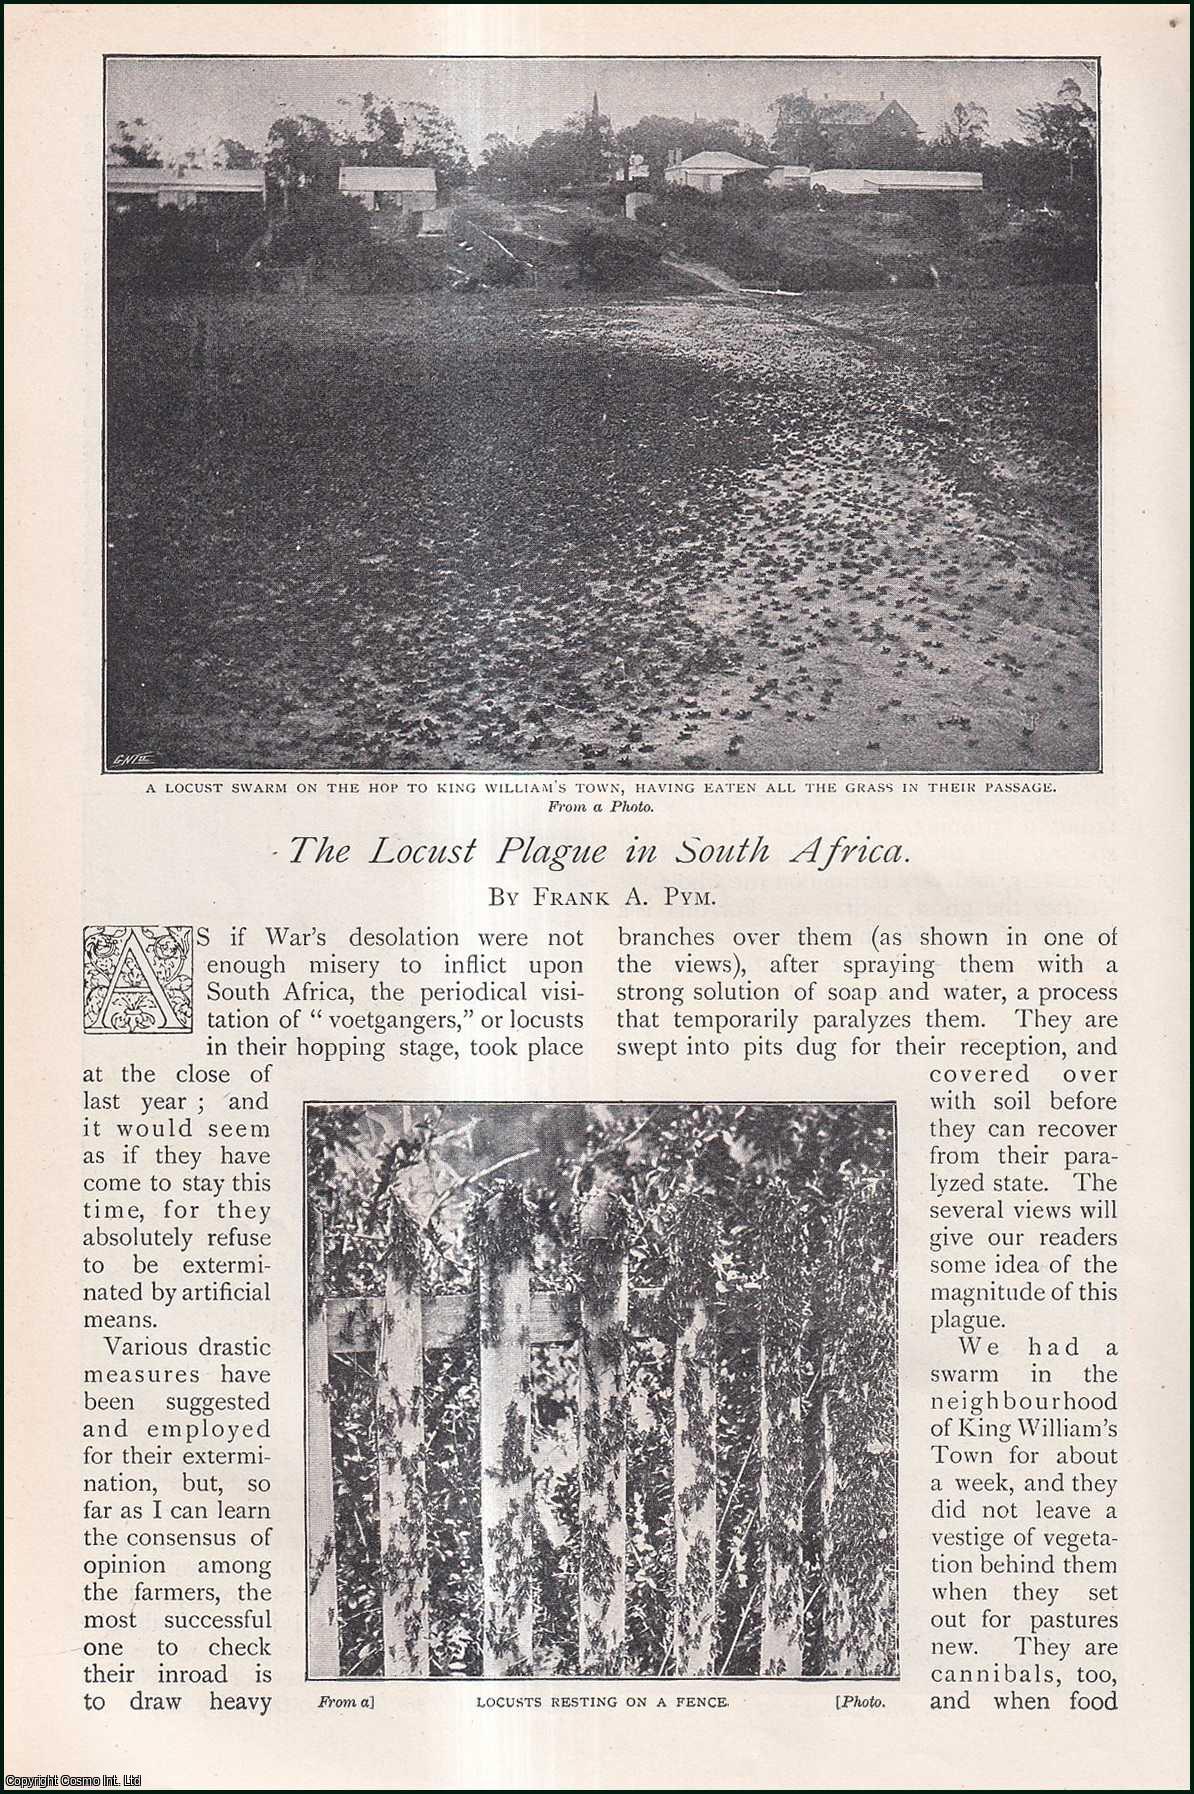 Frank A. Pym - The Locust Plague in South Africa. An uncommon original article from The Strand Magazine, 1901.